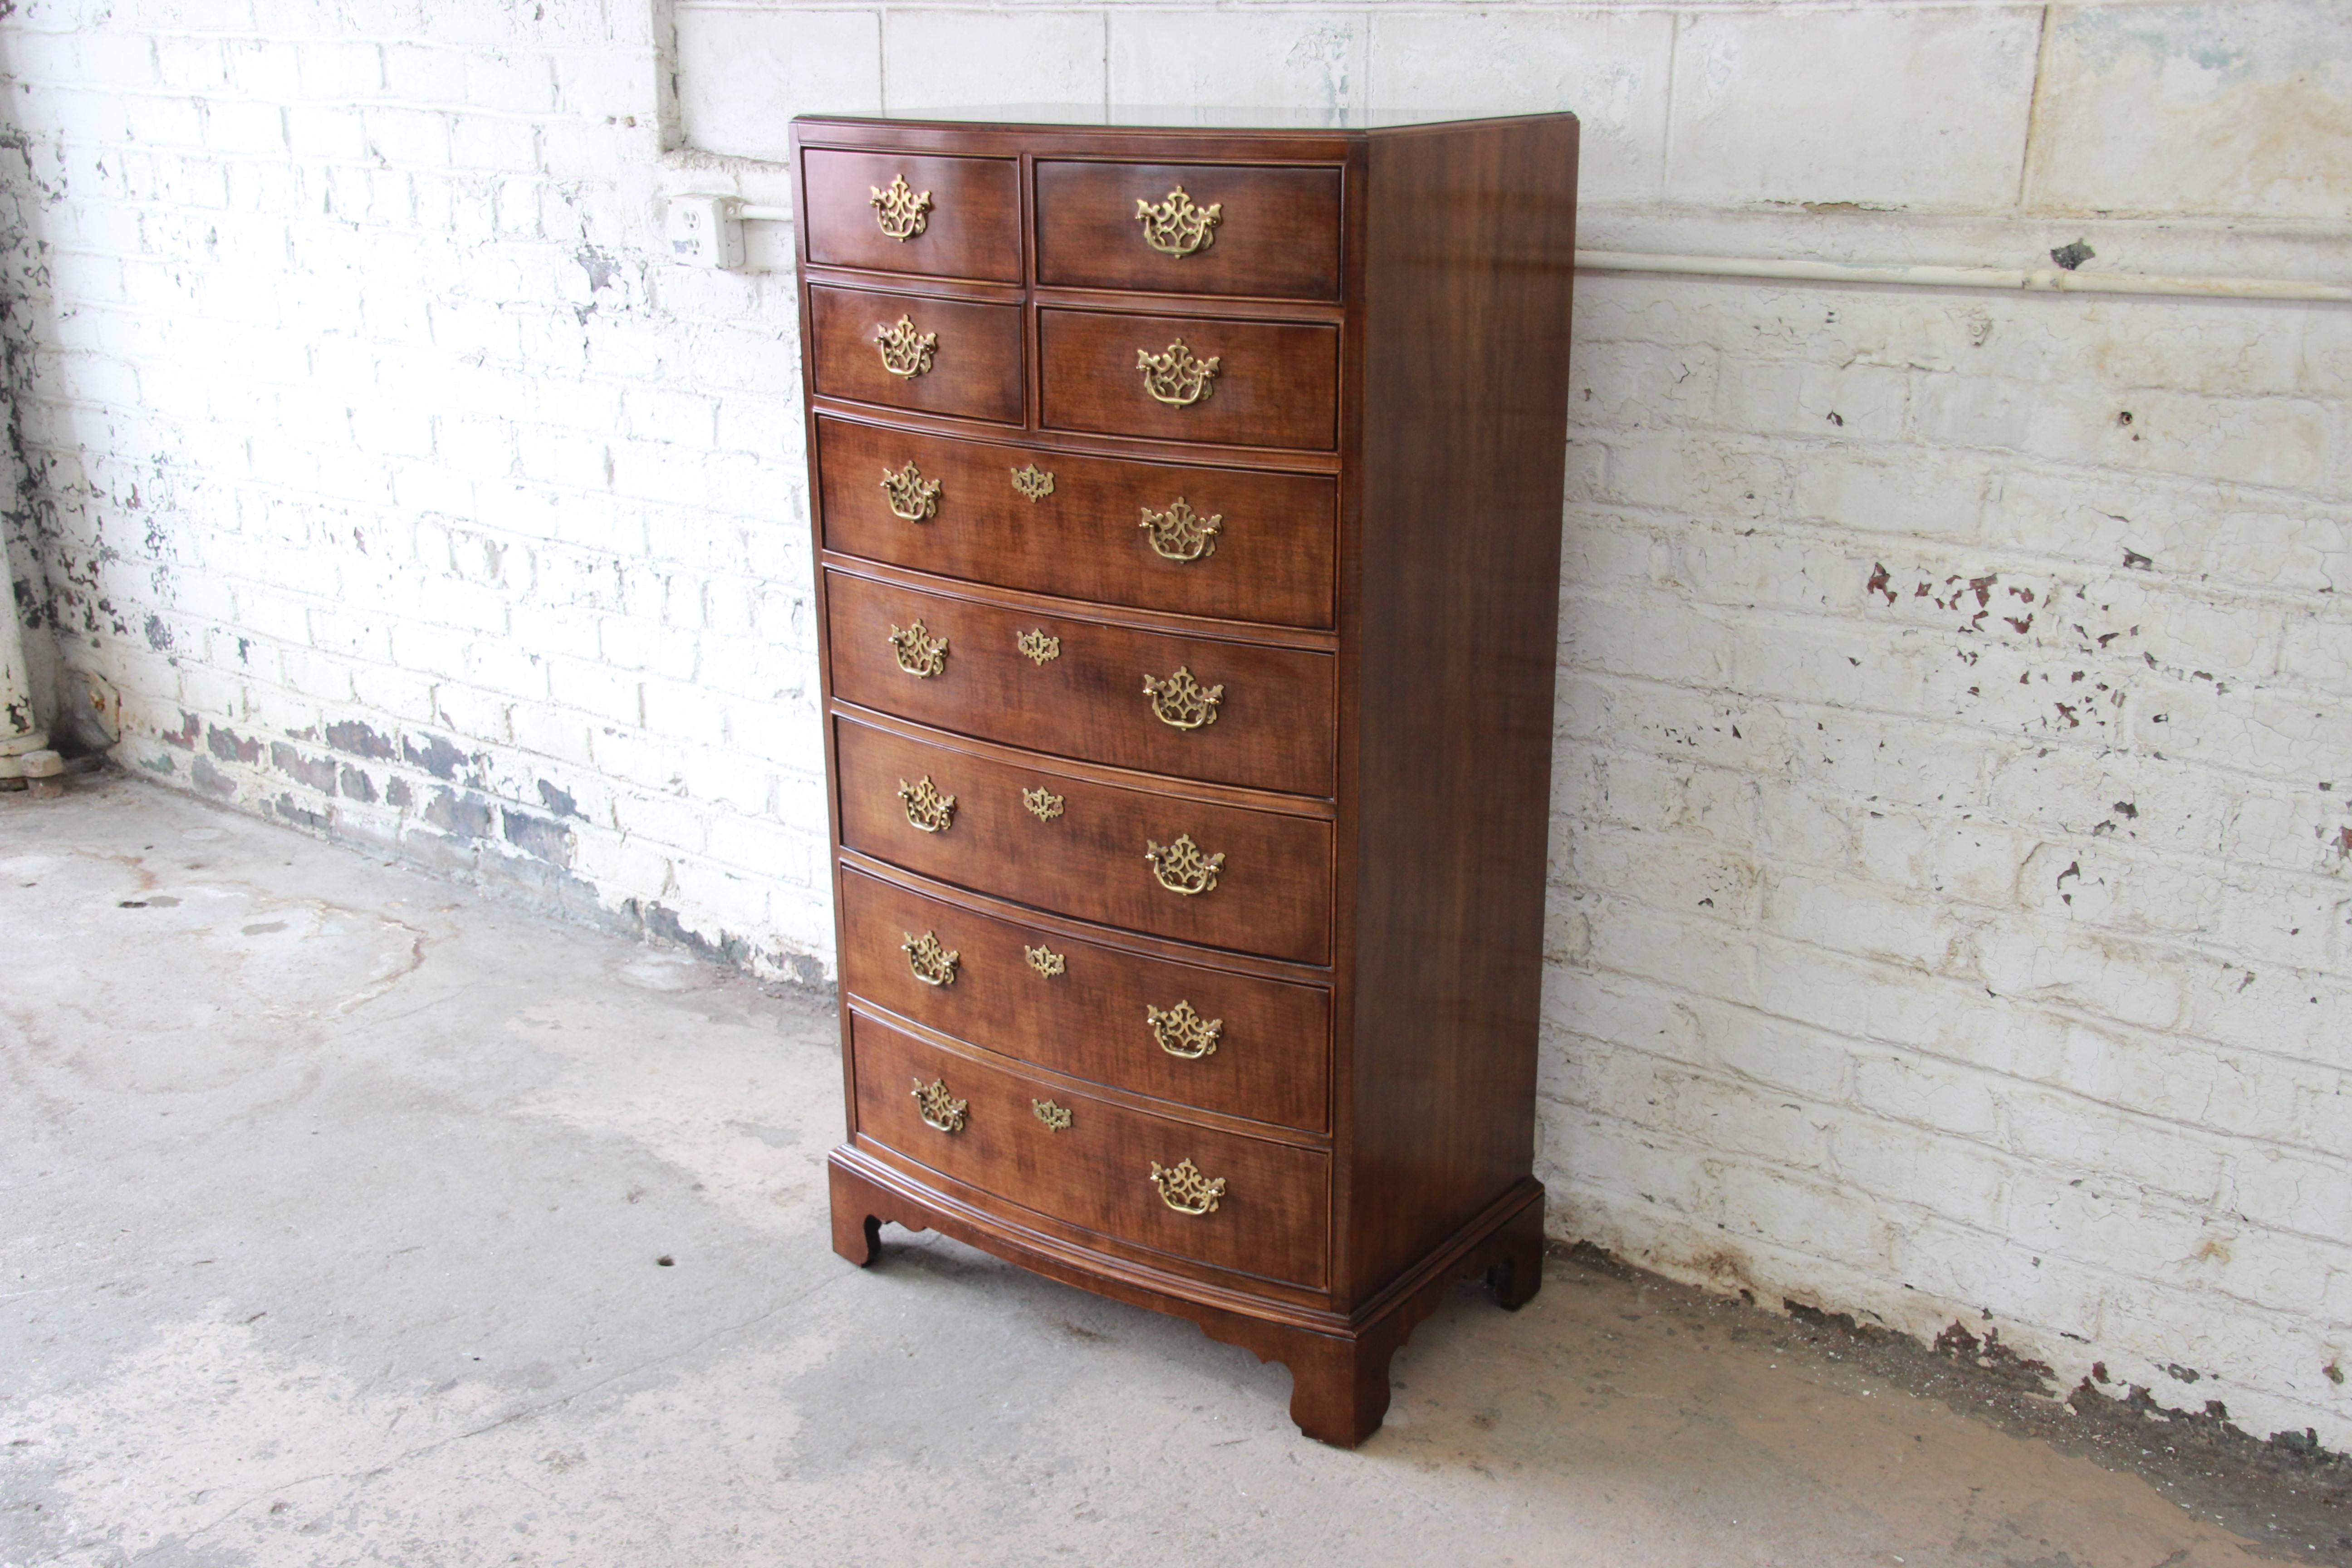 A very nice vintage American Chippendale style mahogany highboy dresser by Henredon. The dresser features beautiful mahogany wood grain and a Classic traditional style. It offers ample room for storage with nine dovetailed drawers. Three of the